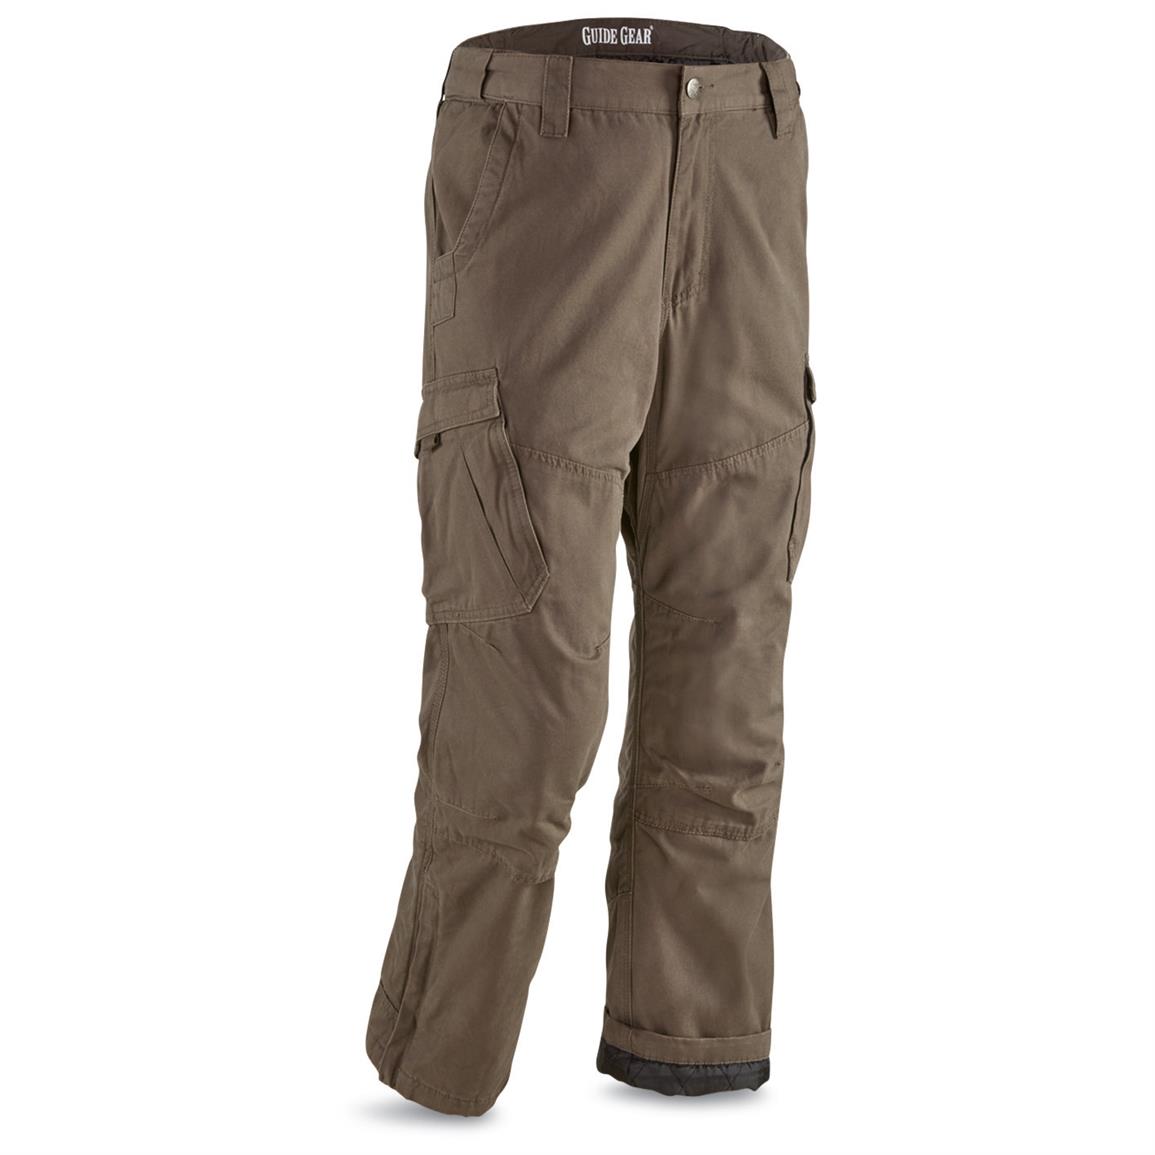 Guide Gear Men's Quilt-lined Canvas Work Pants - 640542, Insulated ...